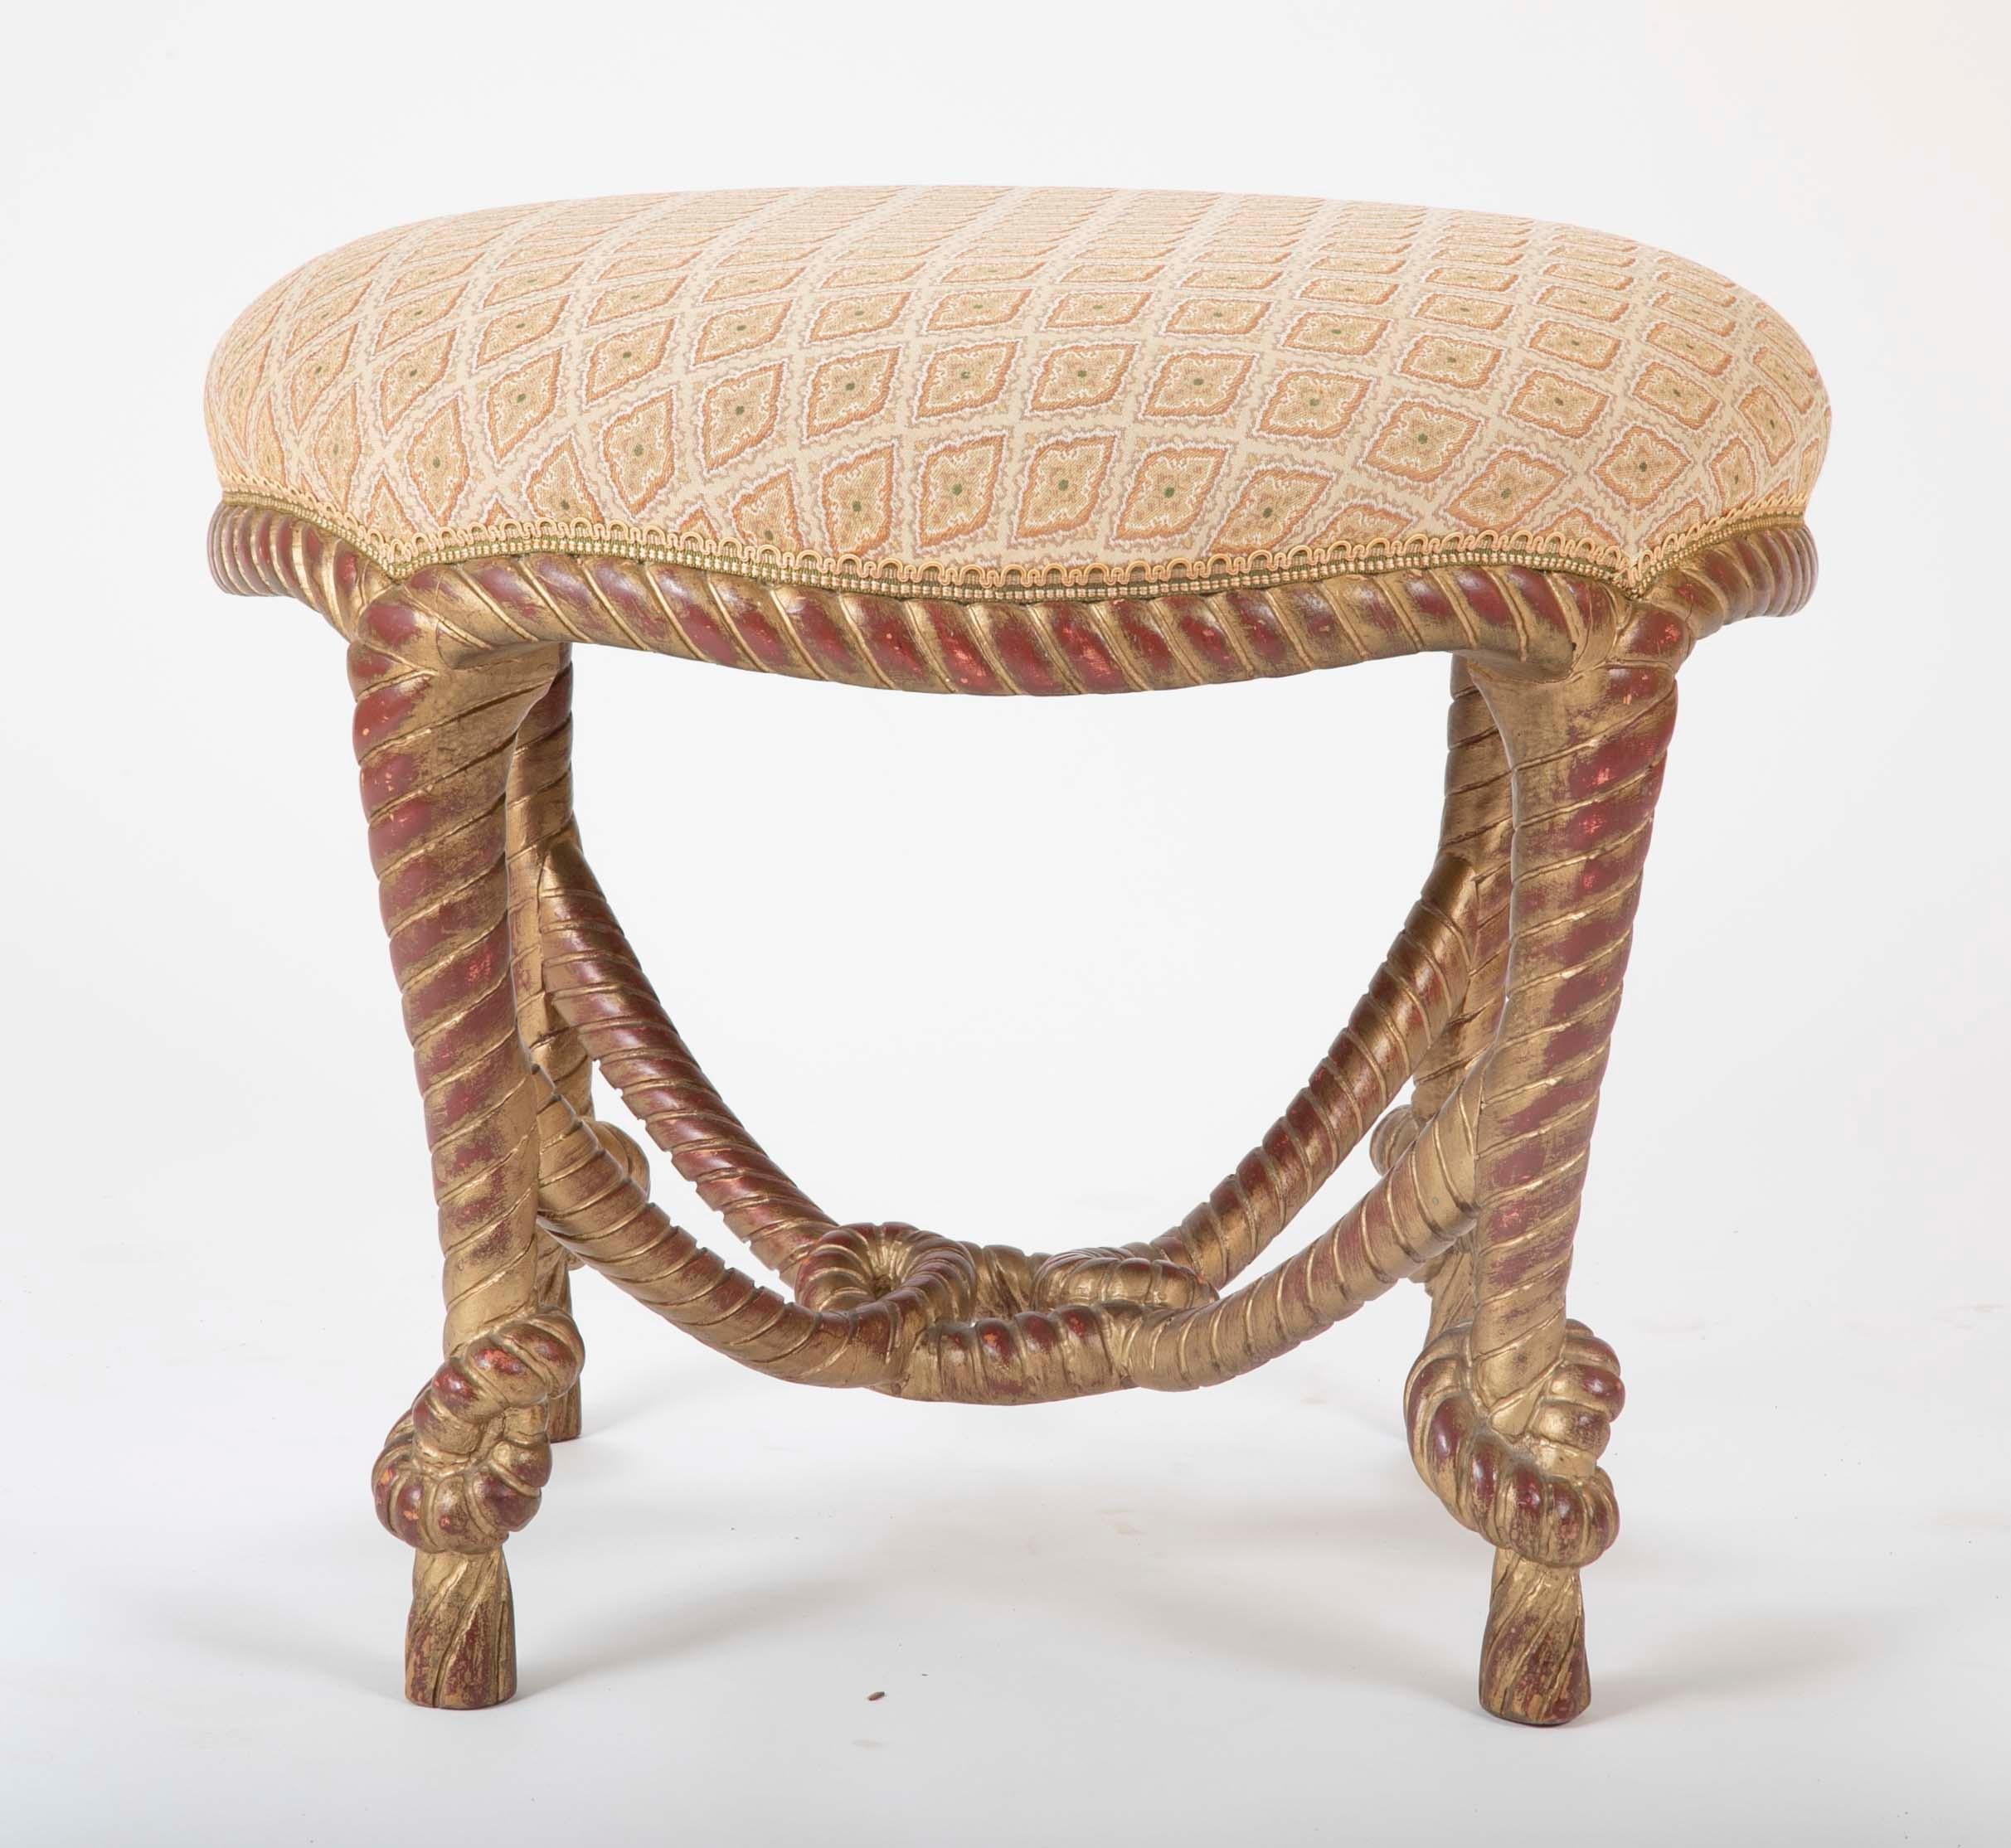 An elegant midcentury Italian hand carved and giltwood twisted rope stool with tassel feet. What is particularly appealing is the red bol showing through the gilding giving the surface a warm patina. A good size at 24 inches diameter.